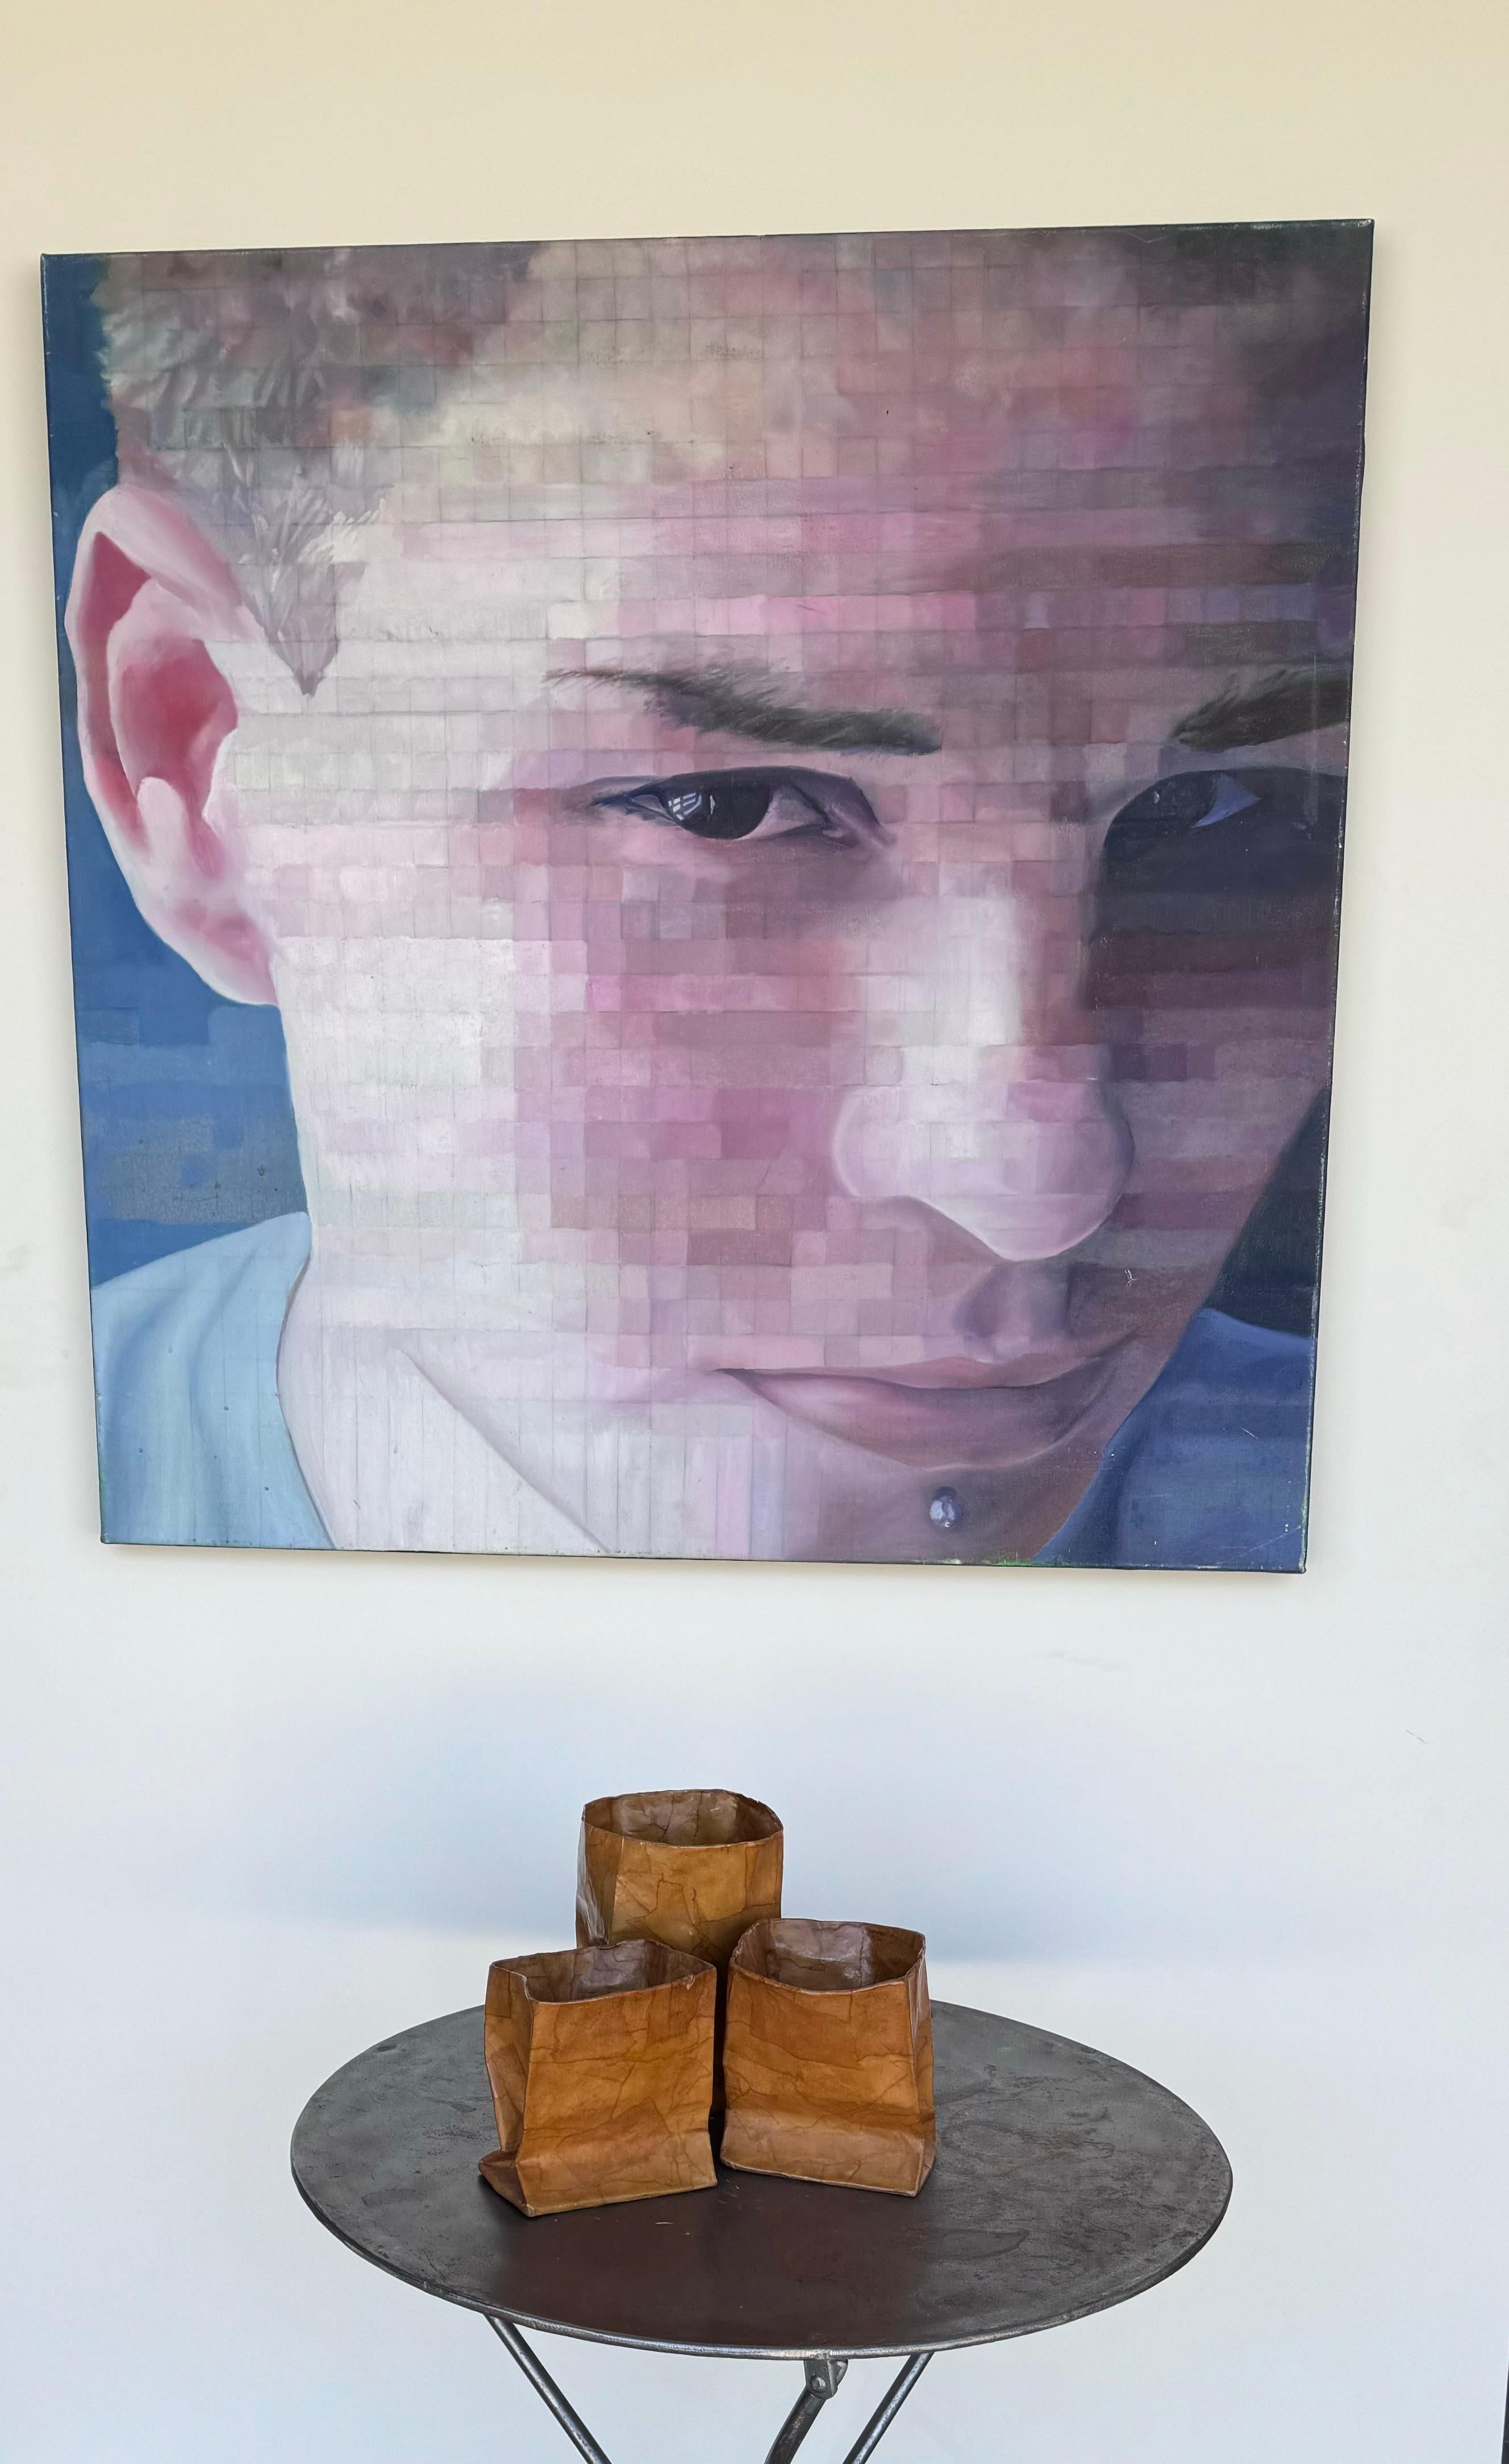 Large acrylic on canvas portrait of a young man with a facial piercing, featuring mosaic like cells that were popularized by the world renowned artist Chuck Close. The reverse bears the name Chris in pencil. Measuring 34” square